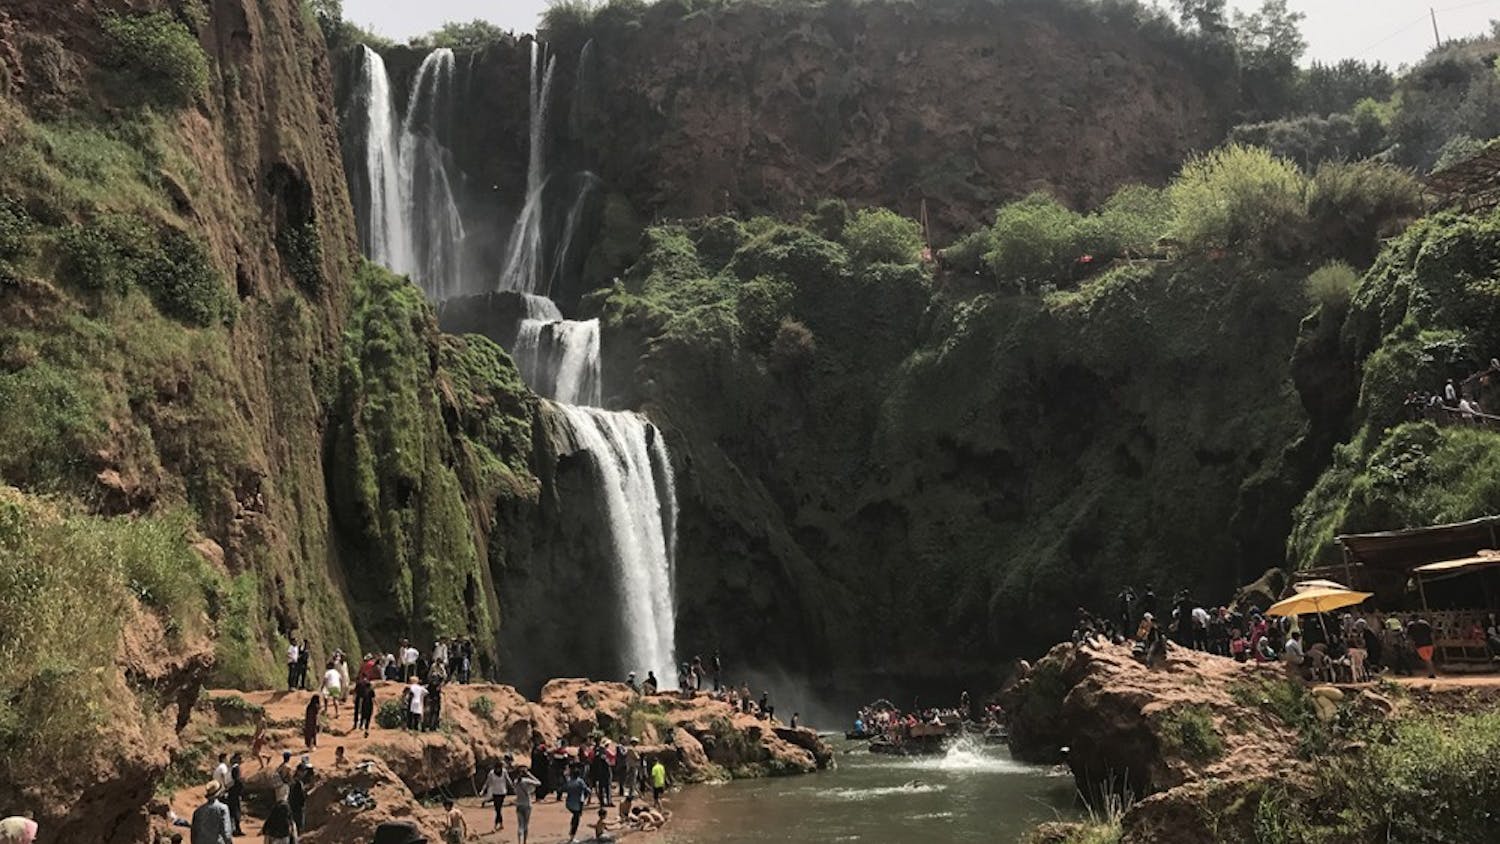 The Ouzoud Falls in Morocco are just one of many natural sites one can find during a visit to the country. This waterfall is located in the Atlas Mountains just a few hours northeast of Marrakech,&nbsp;Morocco.